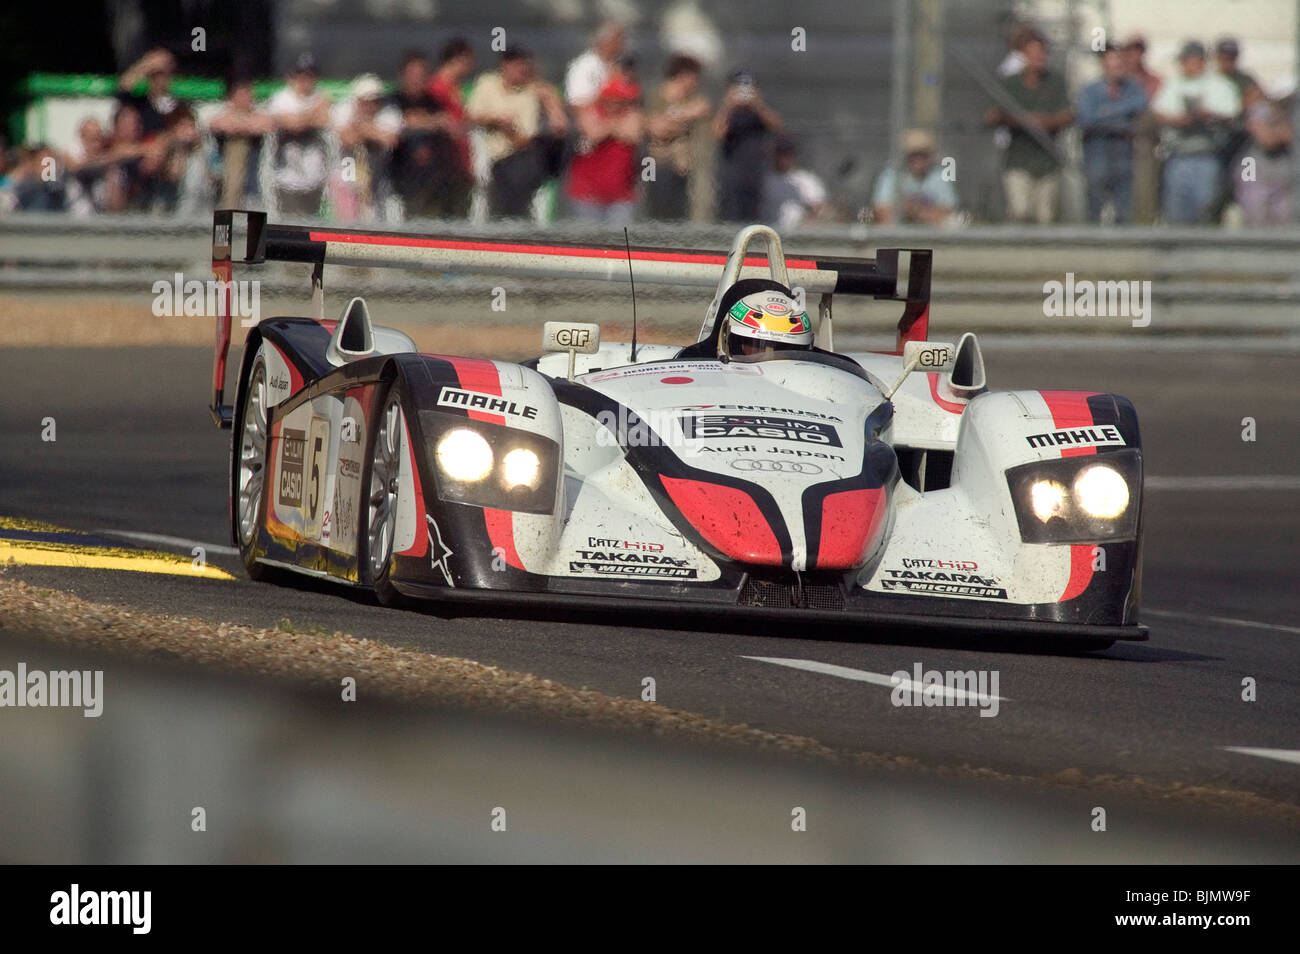 Audi R8 (winning Audi Japan car) in the opening lap of 2004 Le Mans 24 hour race Stock Photo